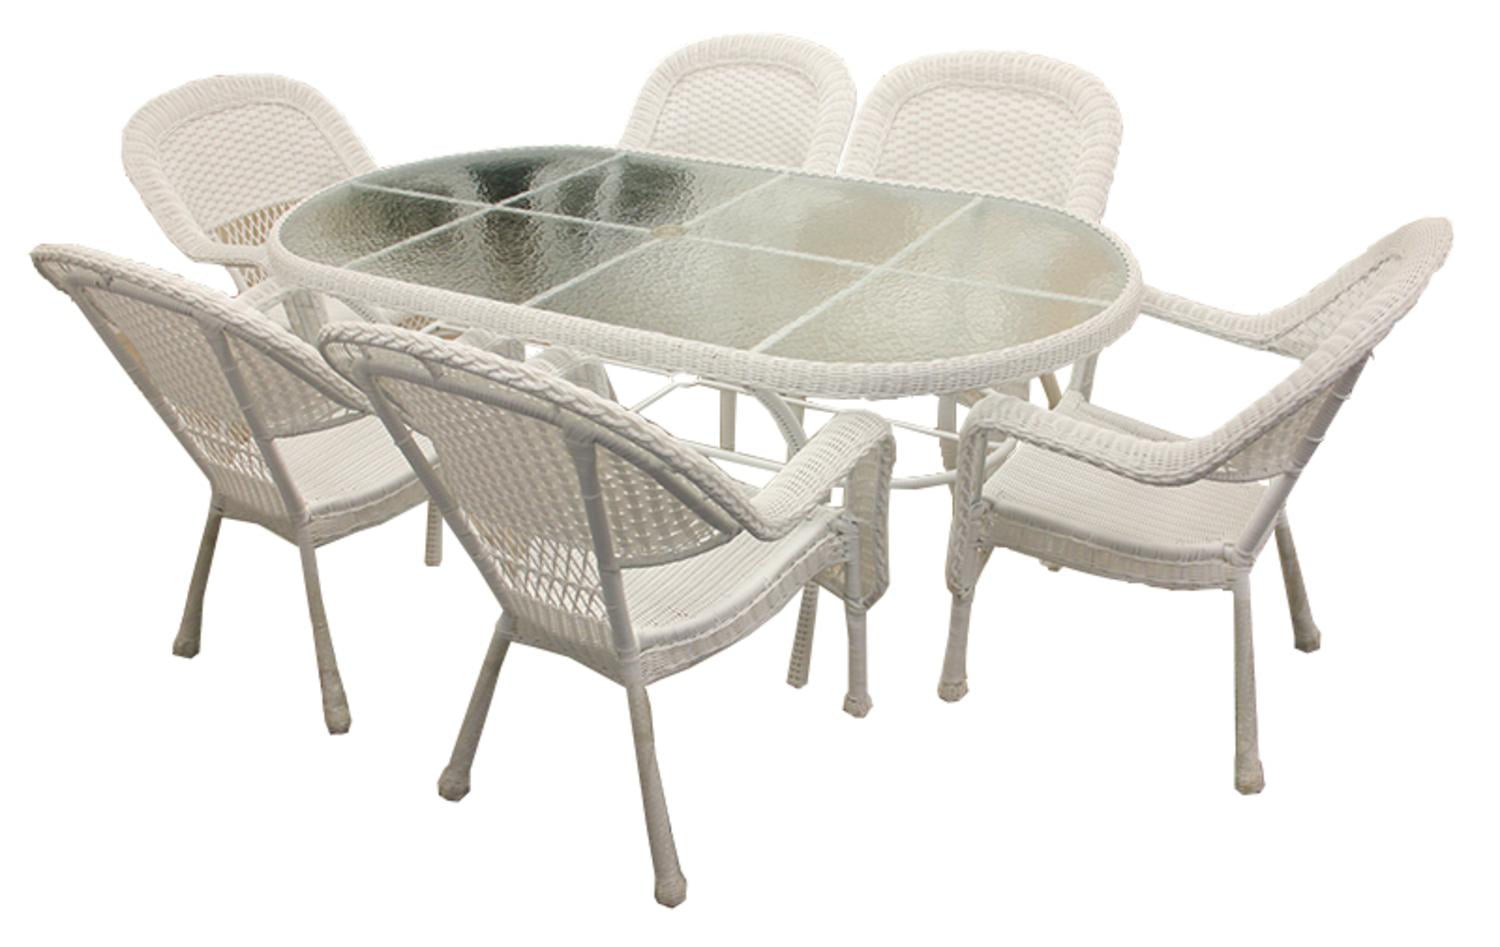 7-Piece White Resin Wicker Patio Dining Set - 6 Chairs and 1 Dining